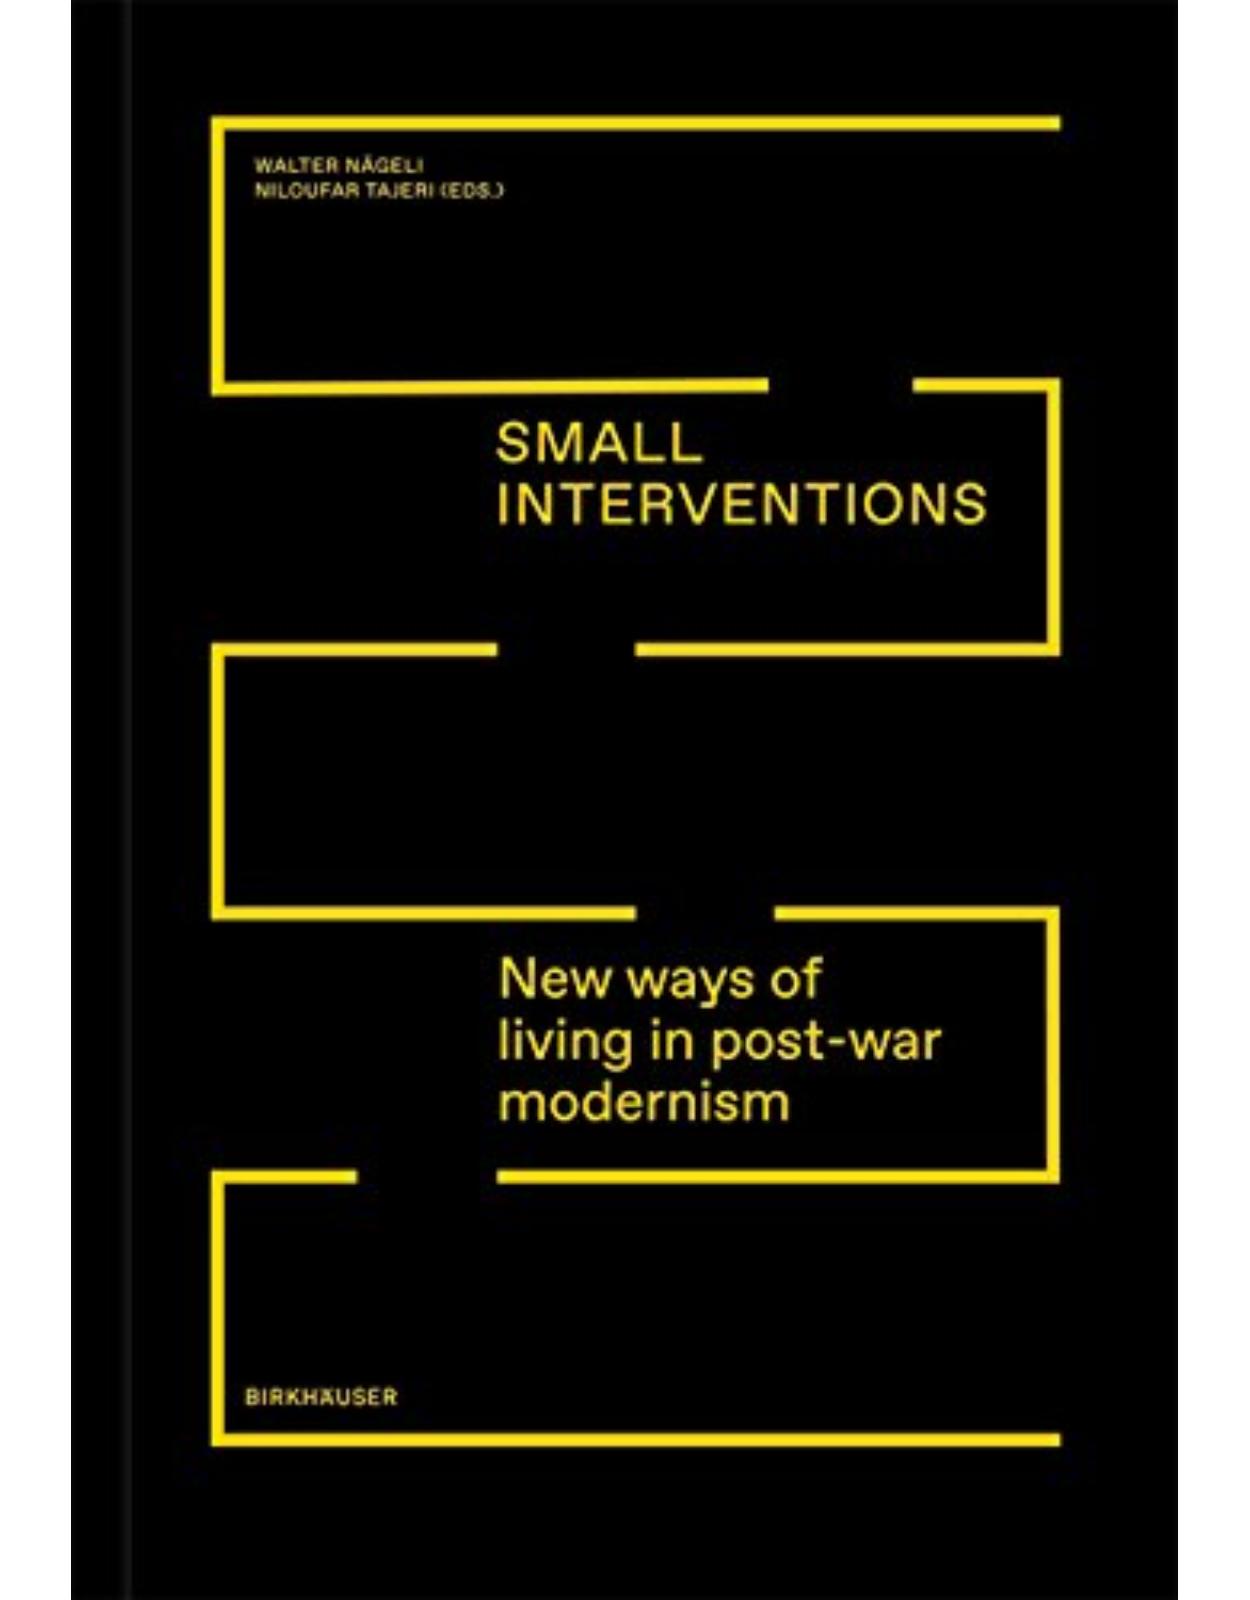 Small Interventions: New ways of living in post-war modernism